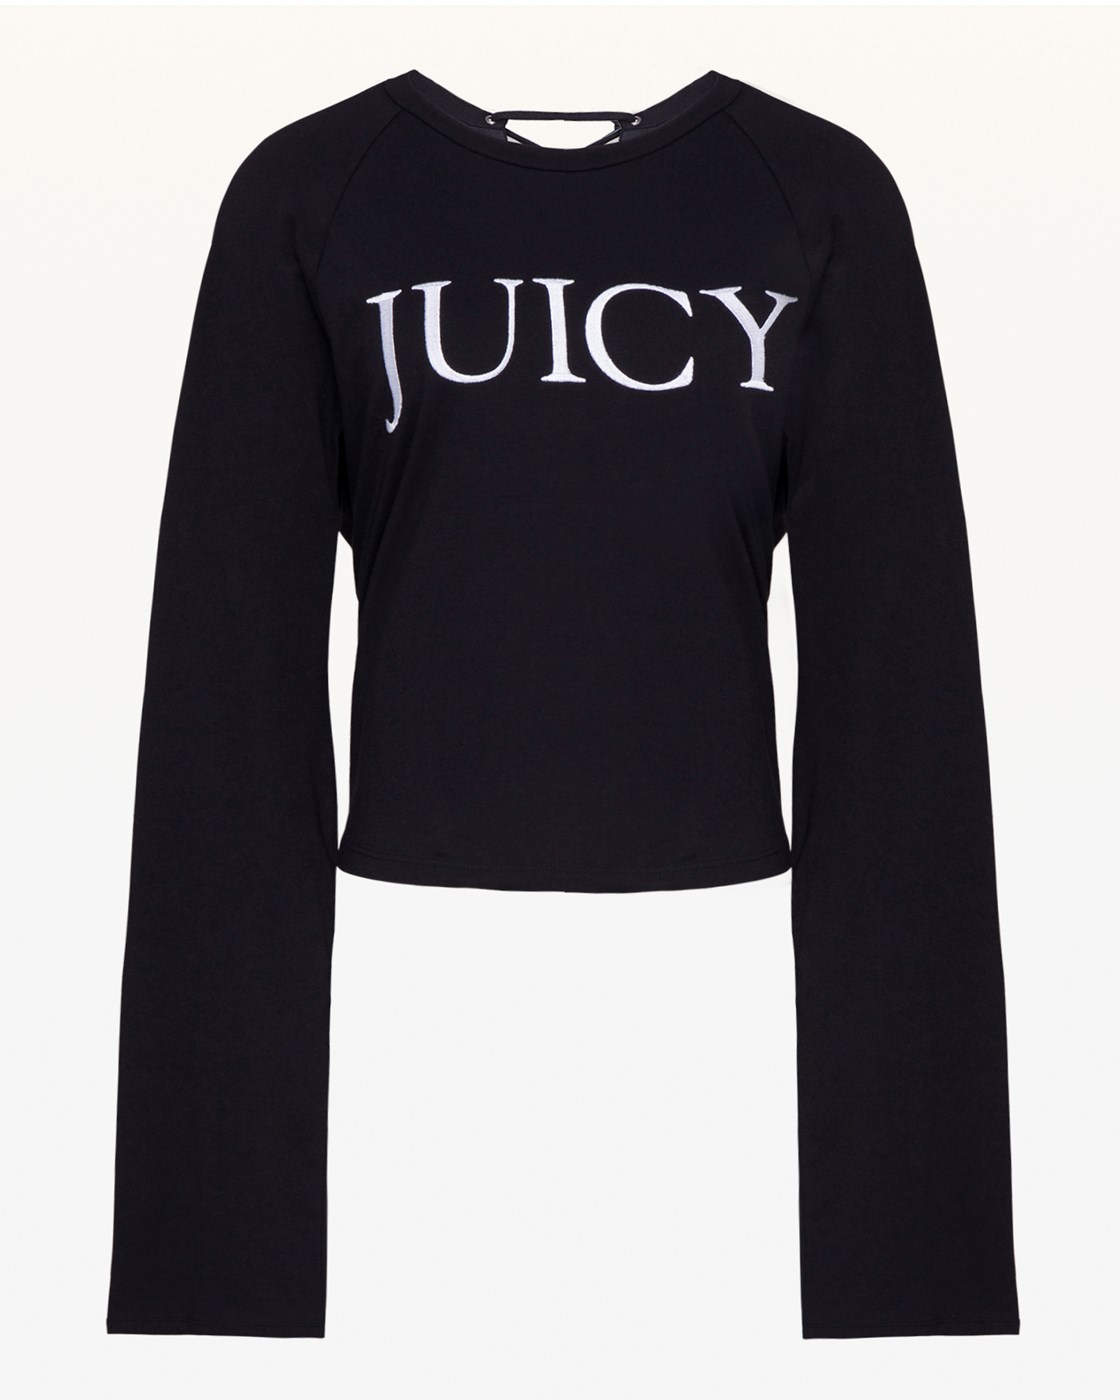 Juicy Couture Lace Up Long Sleeve Tee